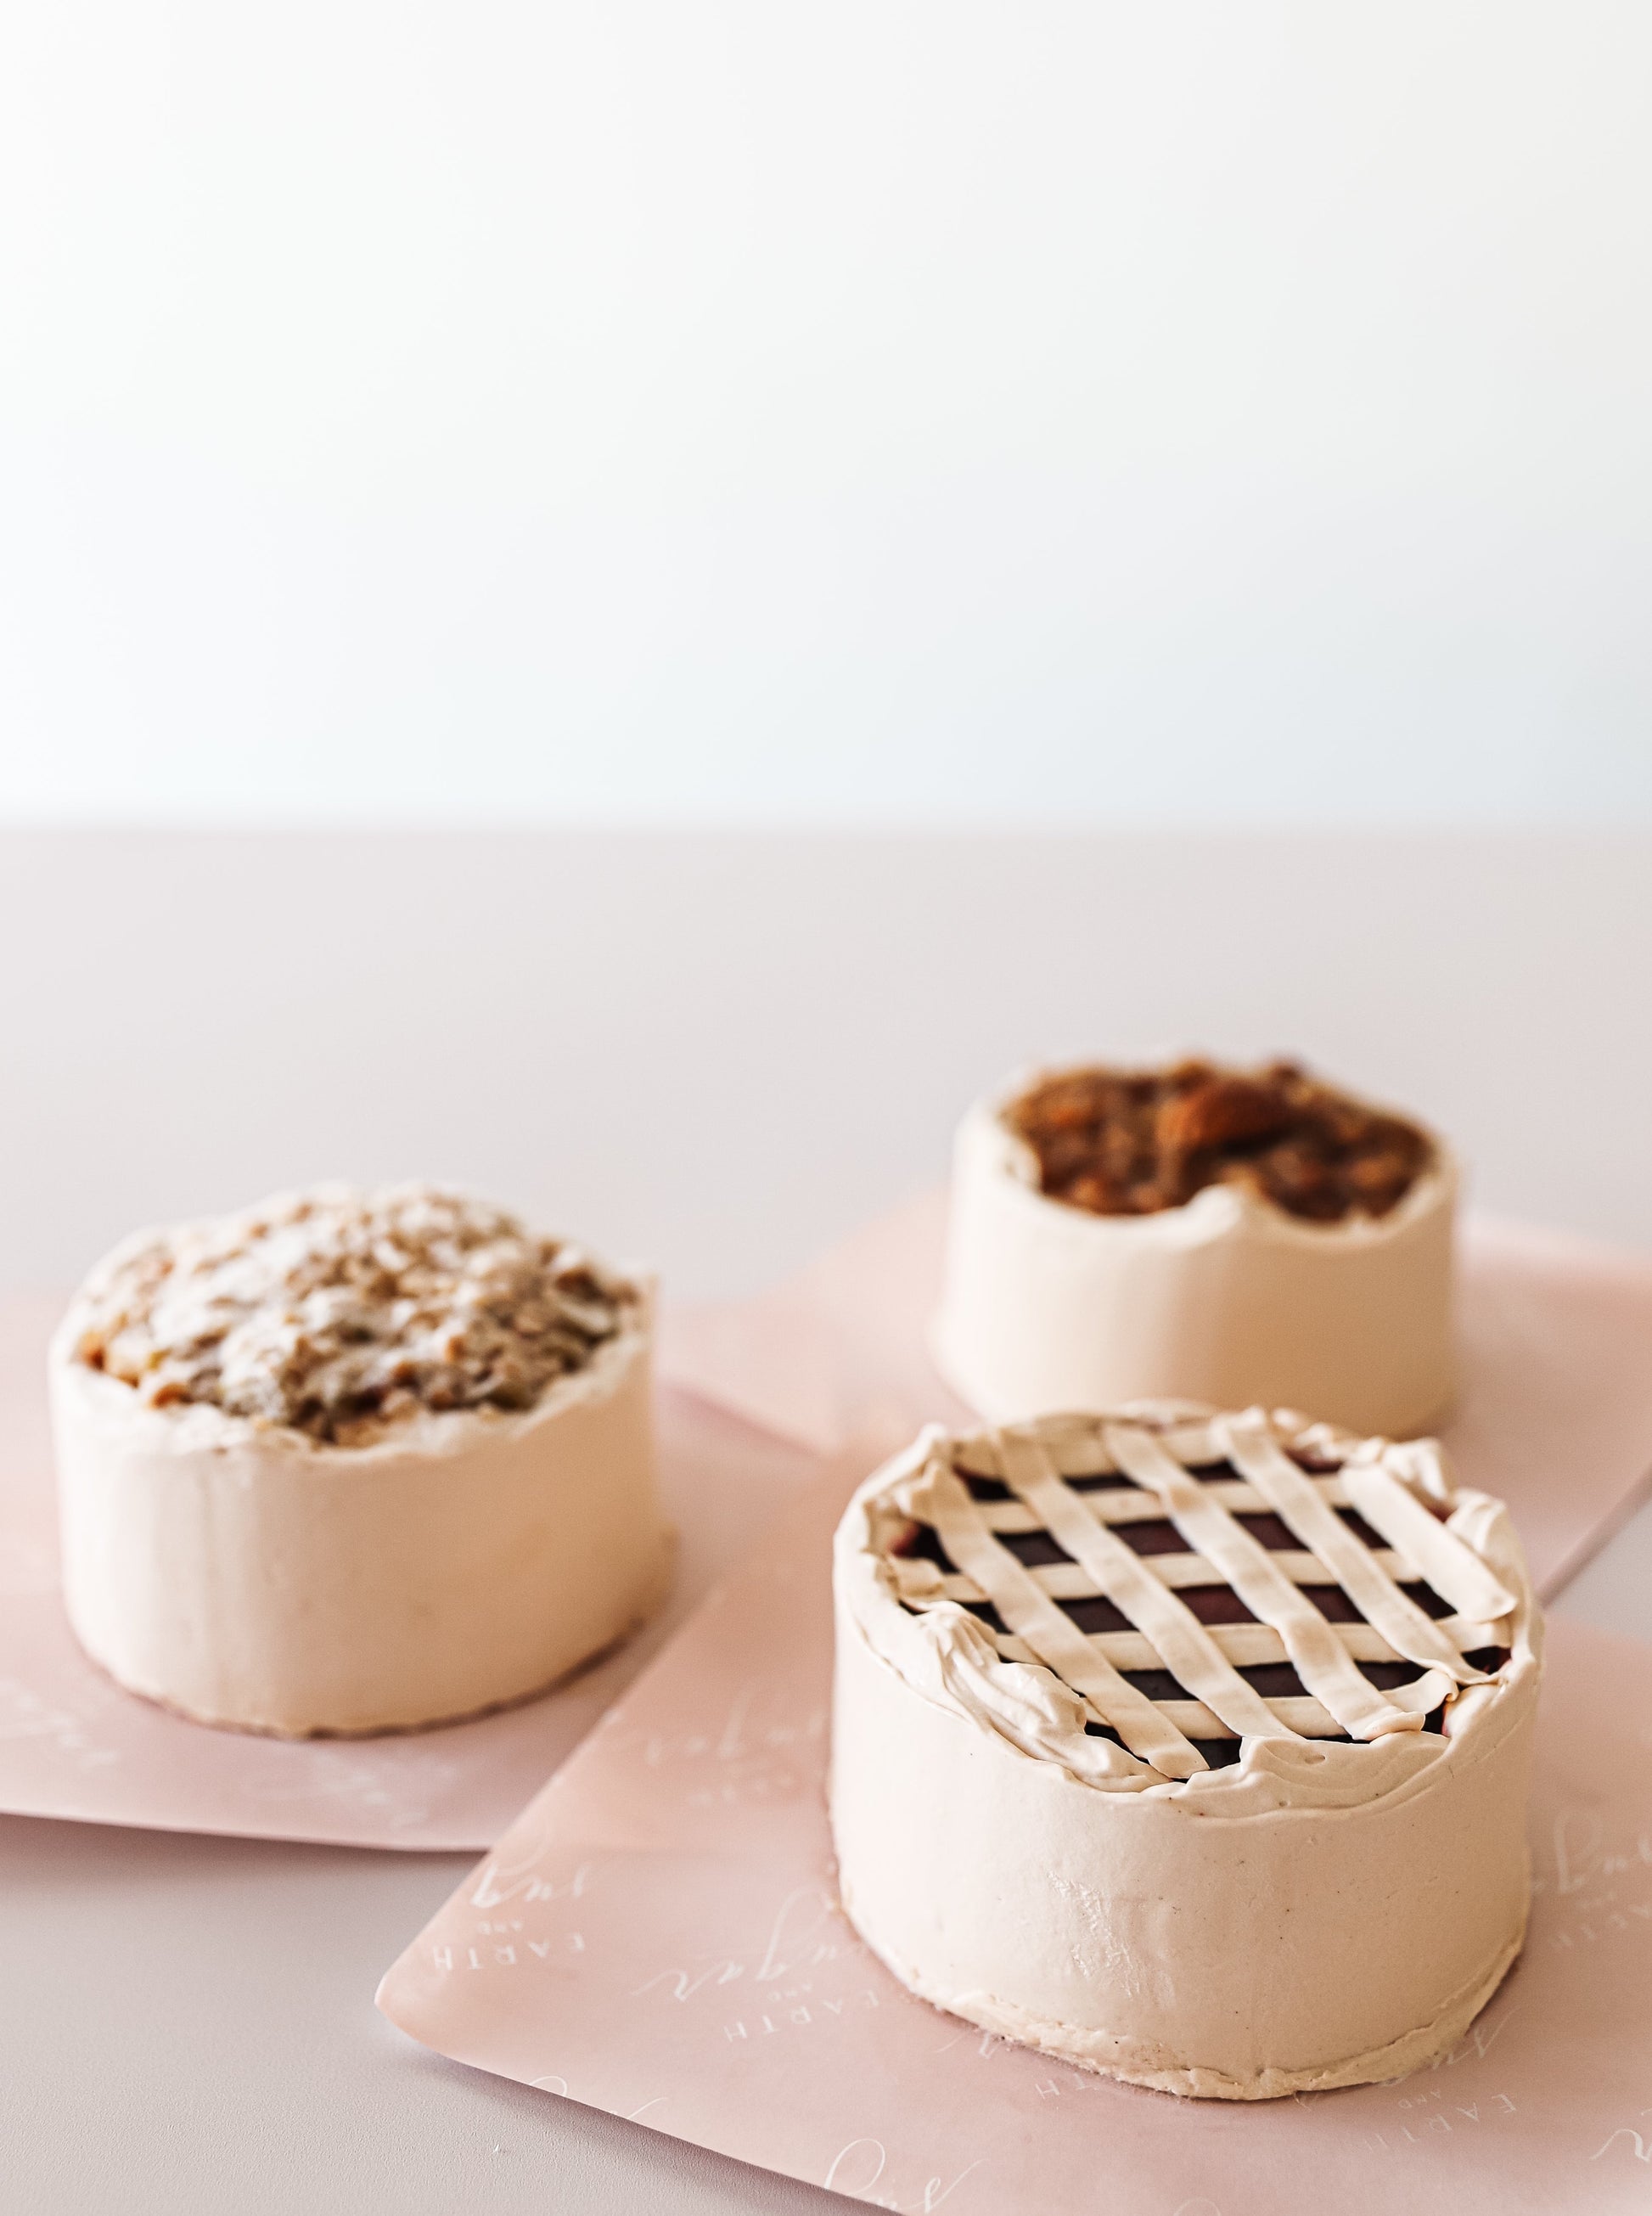 Three Thanksgiving-inspired cakes: one designed as an apple crumble pie, another with a classic lattice top, and the third boasting a pecan caramel finish.